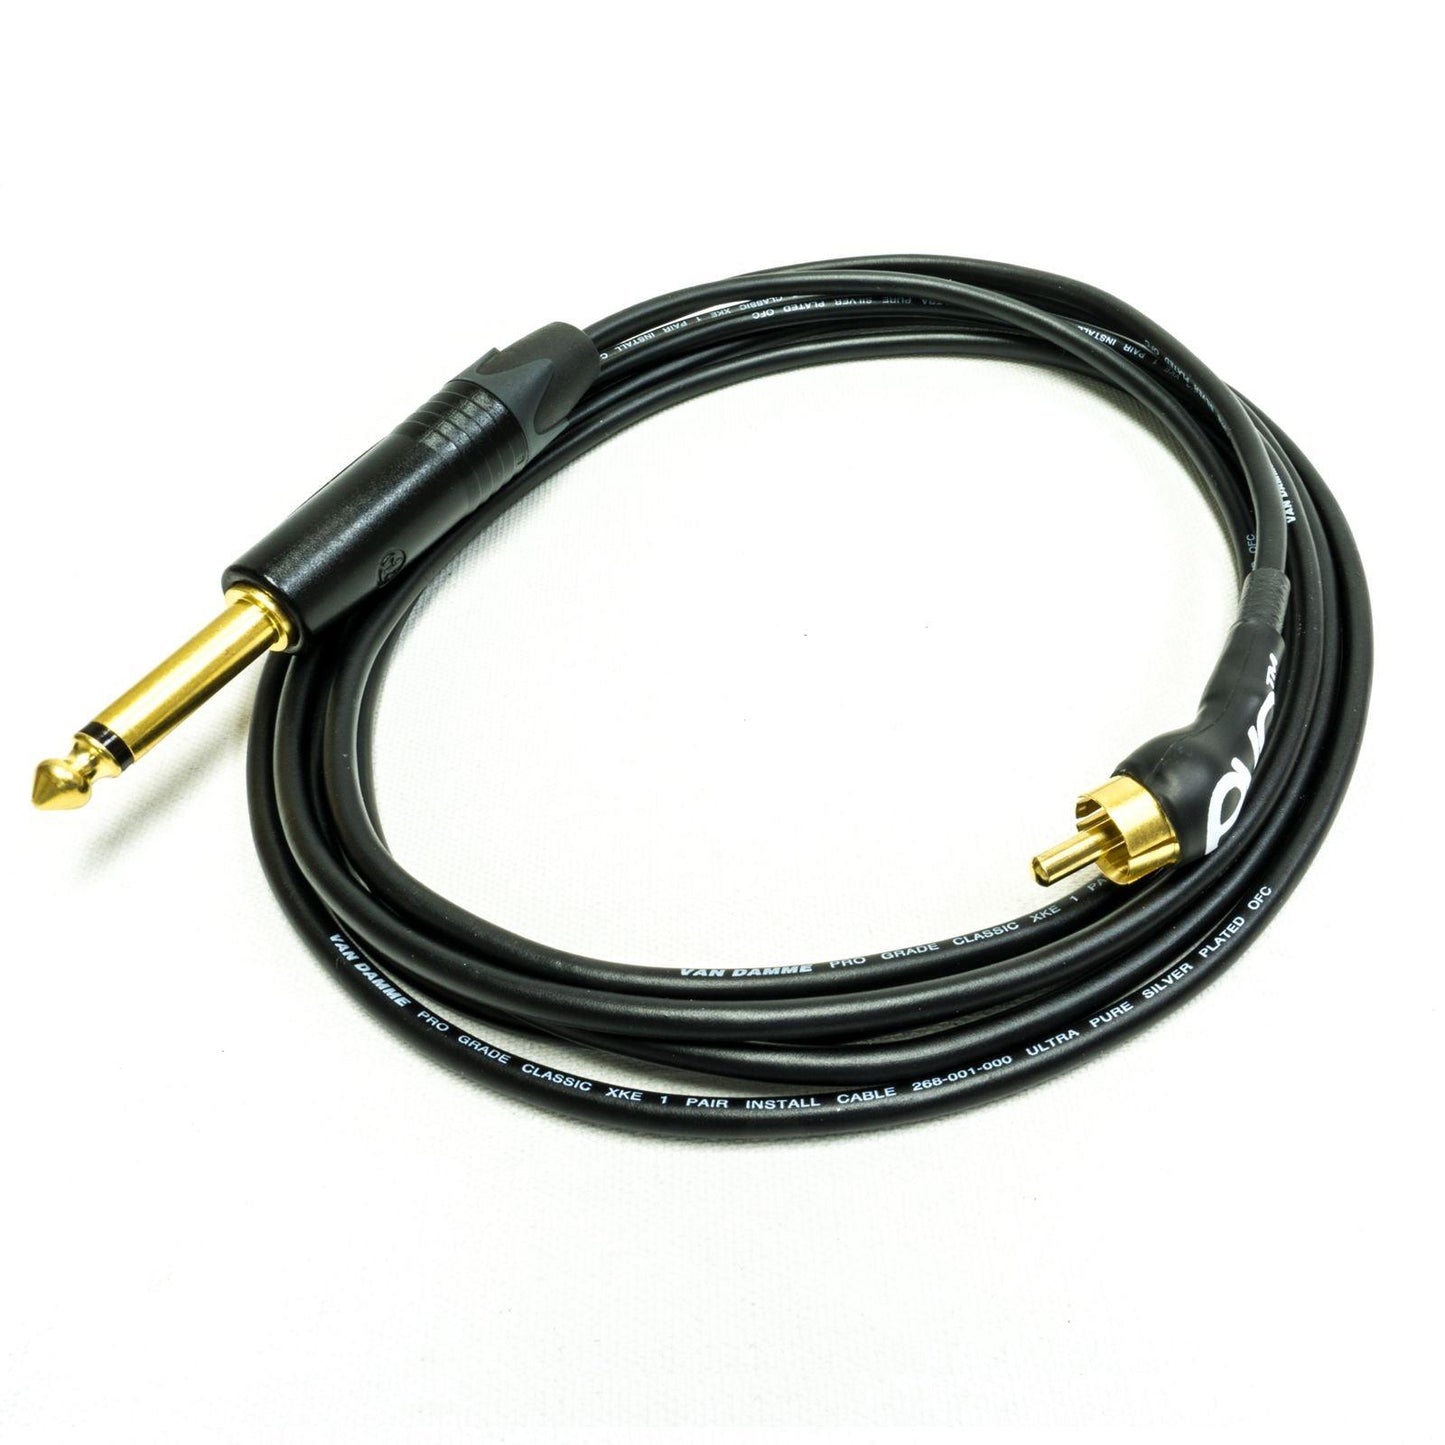 Evolution Mazikeen Tattoo Cord. 45 Degree, RCA to Jack Cable - Tattoo Everything Supplies